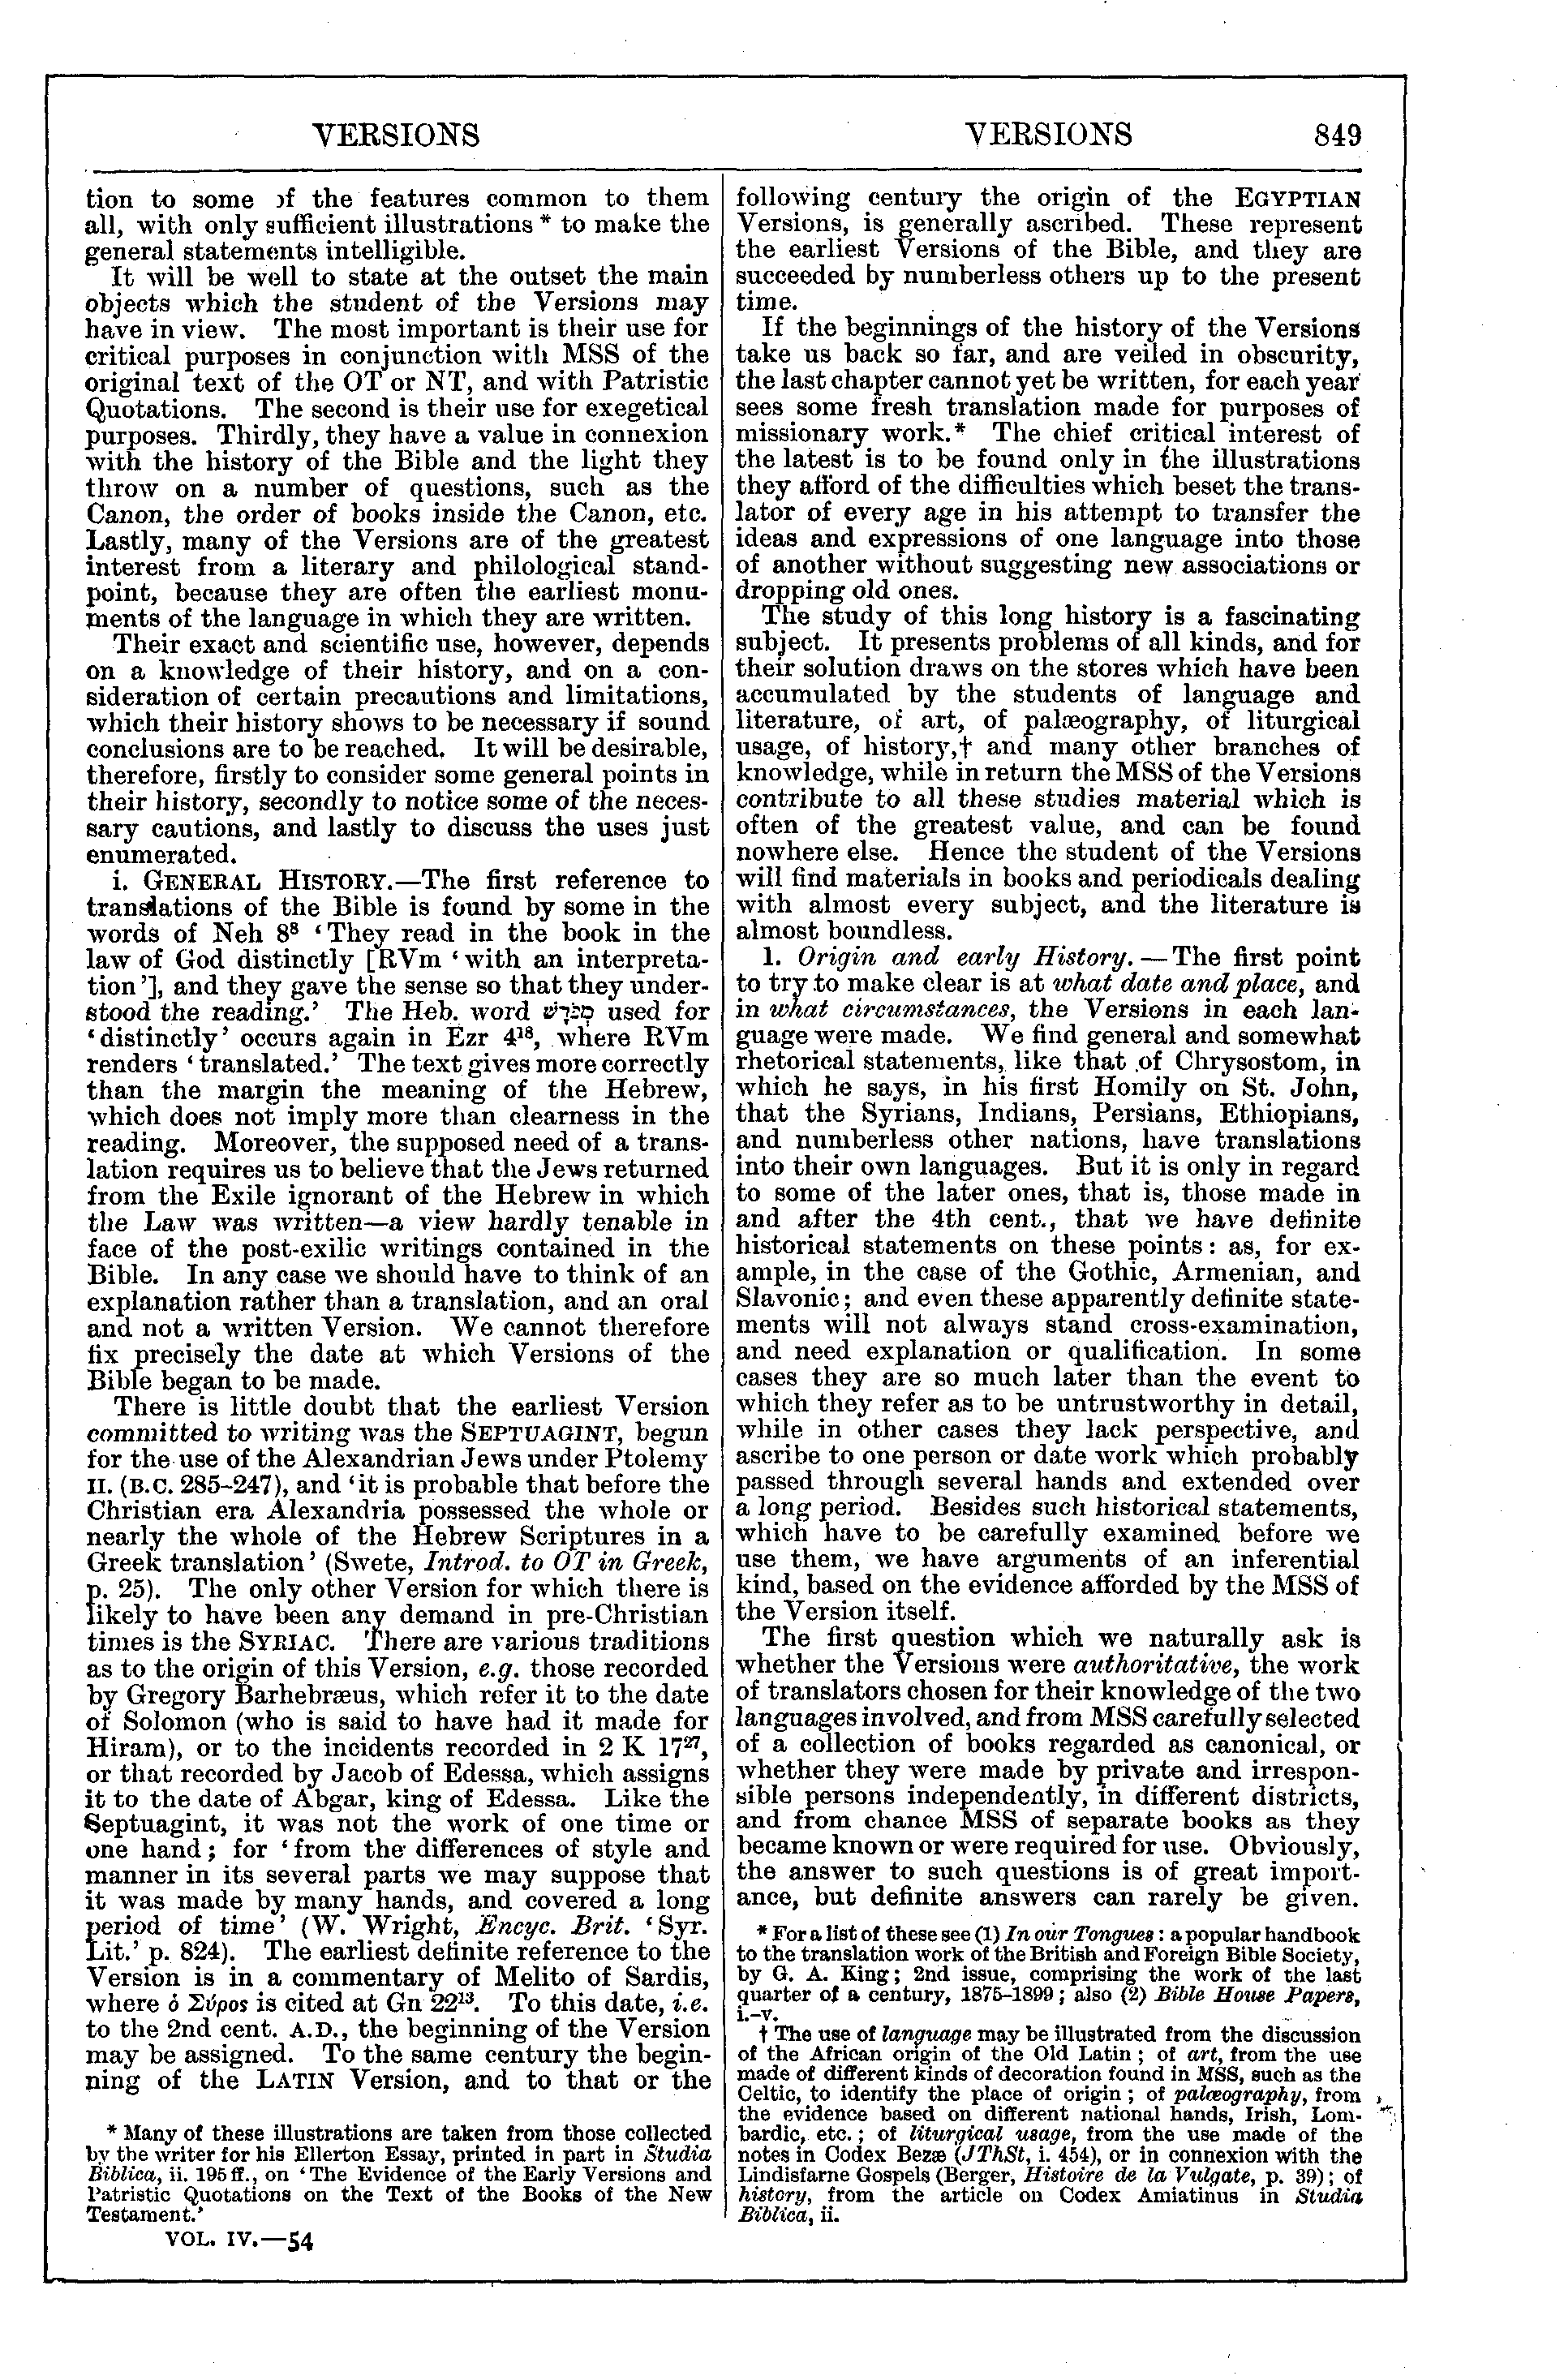 Image of page 849